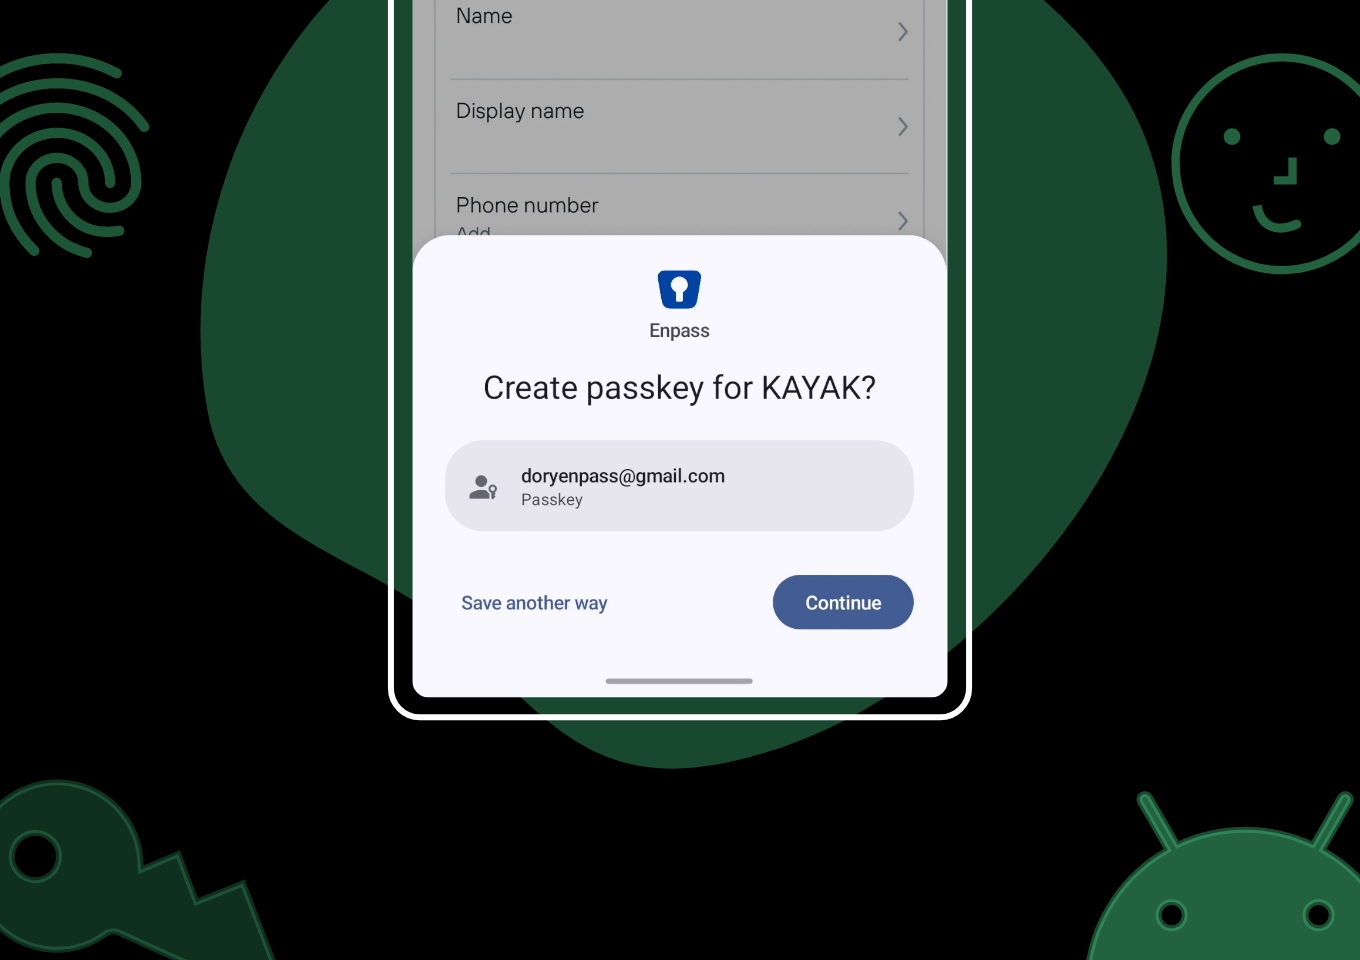 Enpass for Android now supports managing passkeys